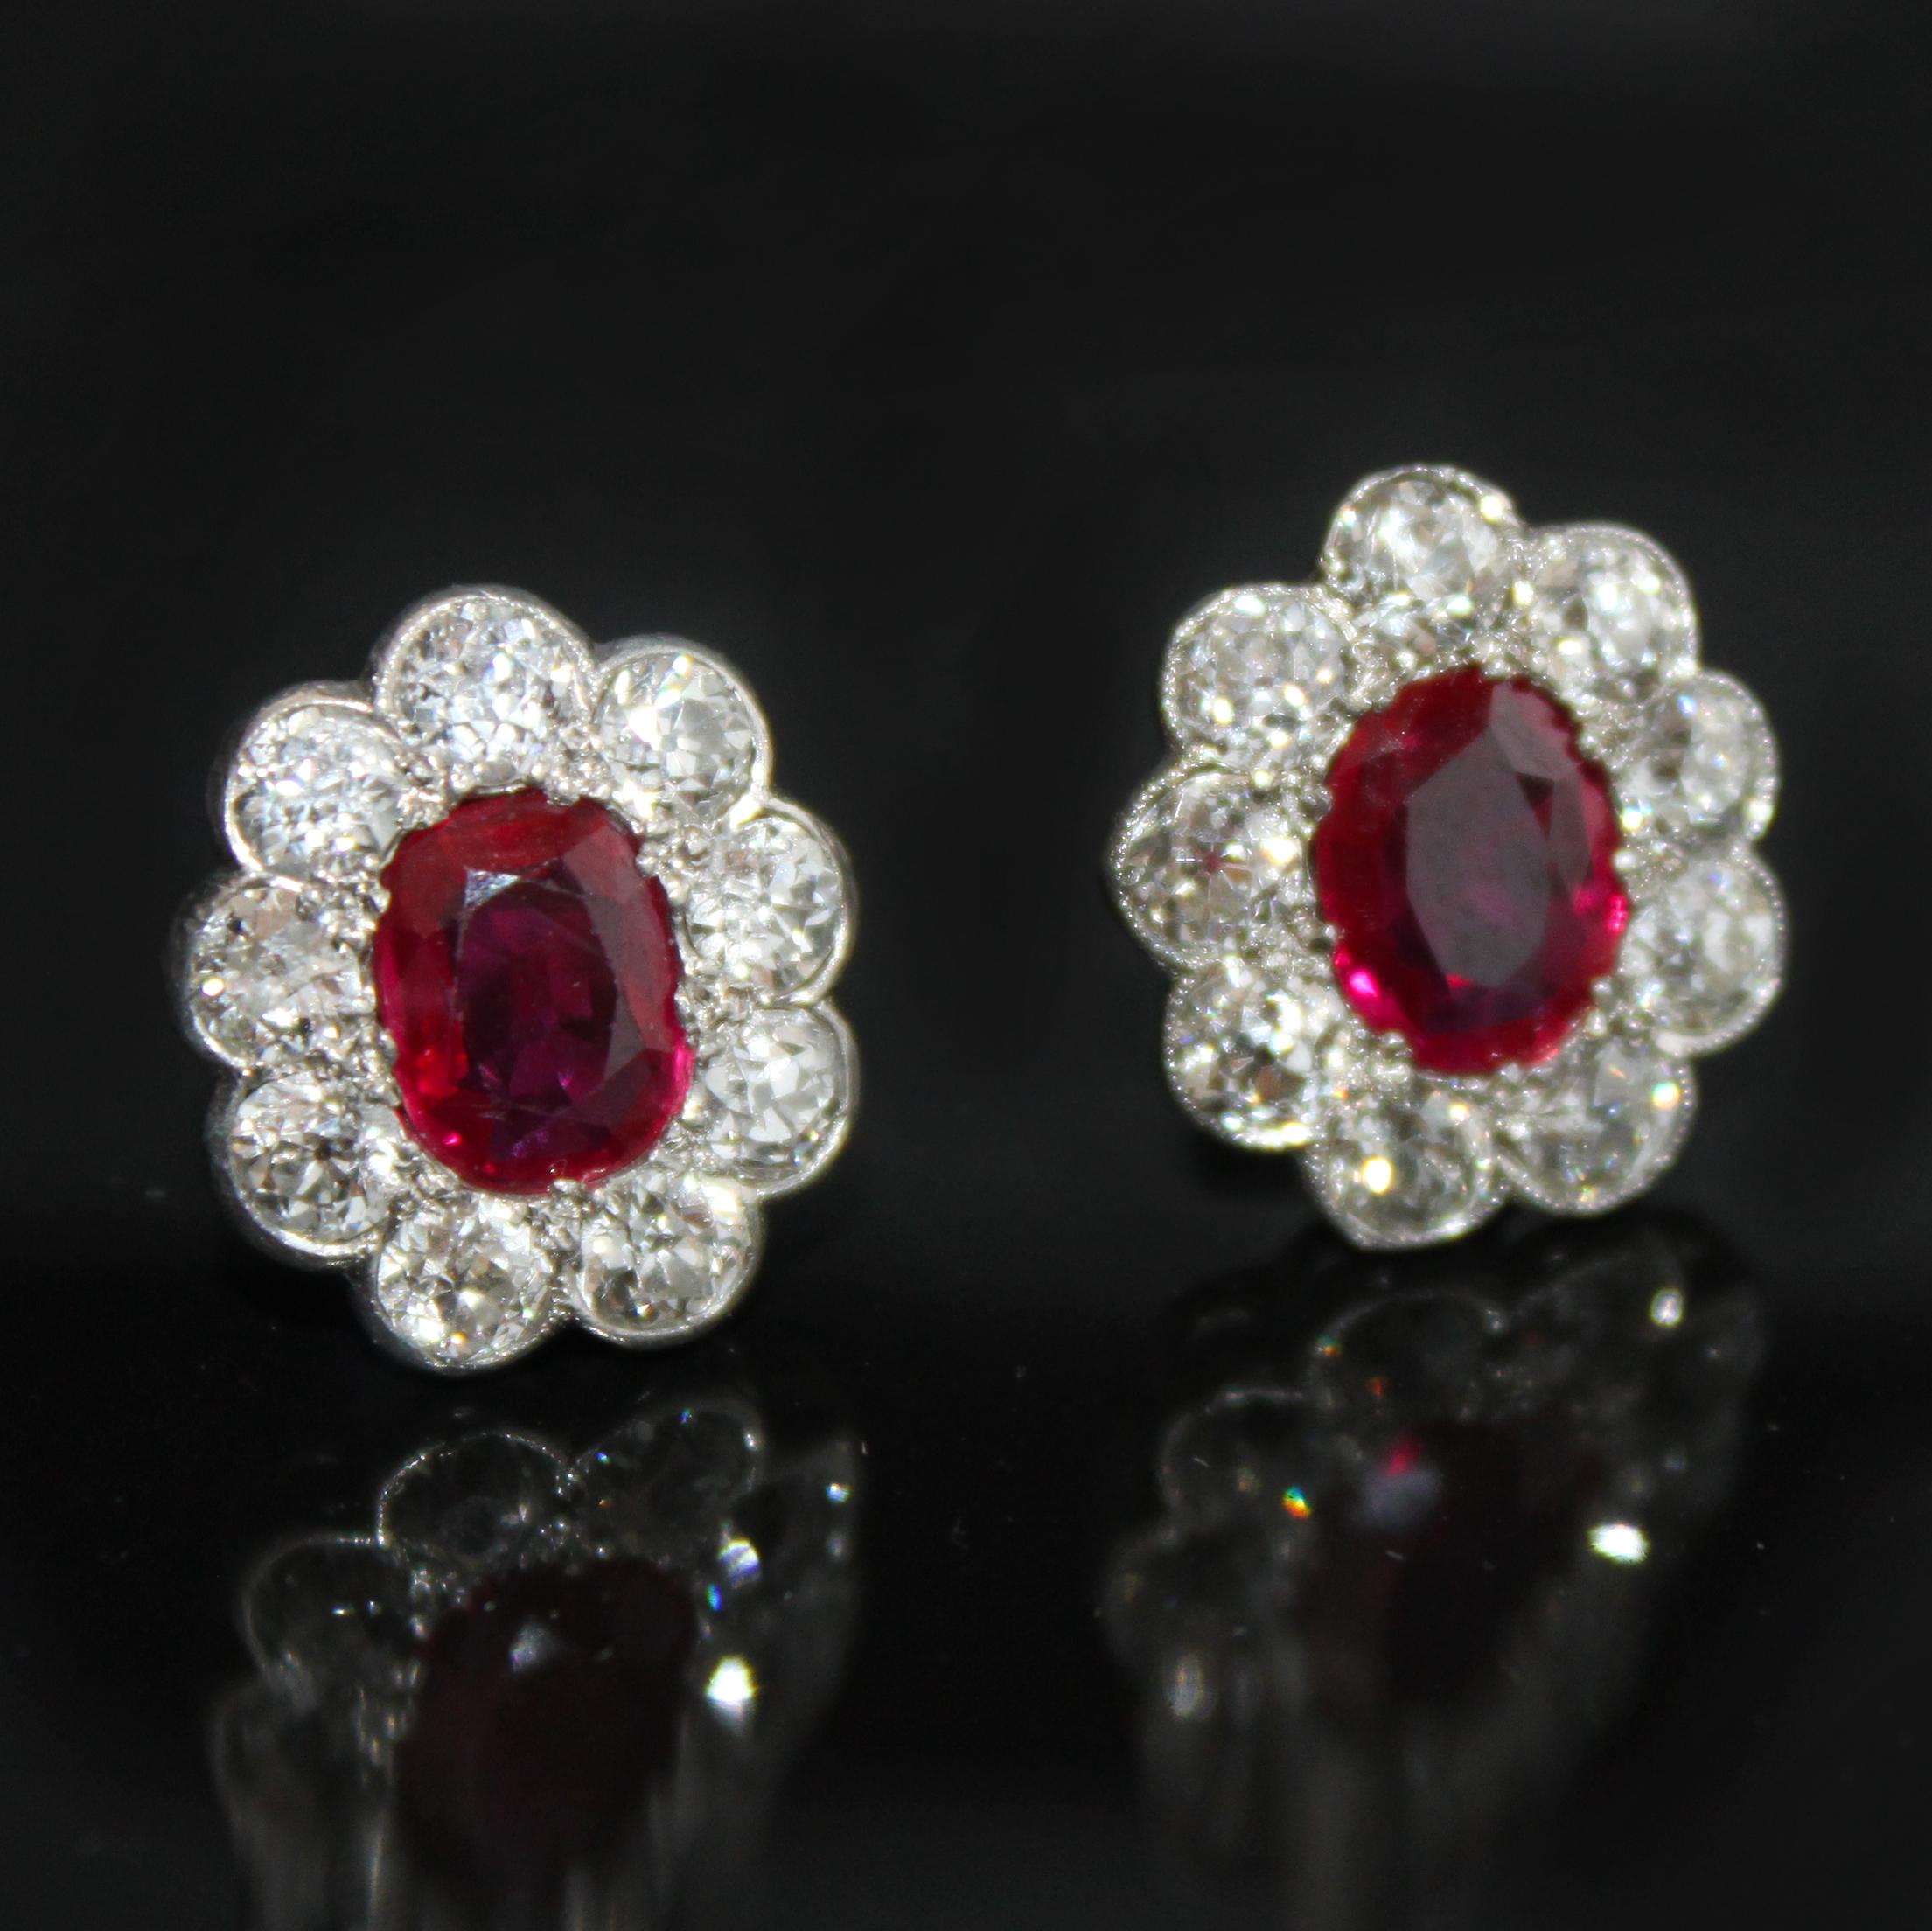 A pair of Edwardian ruby and diamond cluster earrings, ca. 1910s. The rubies are of Burmese (Myanmar) origin and natural (not heat treated), weighing approximately 2.5 carats - accompanied by a DSEF gemological certificate. They are a very fine and